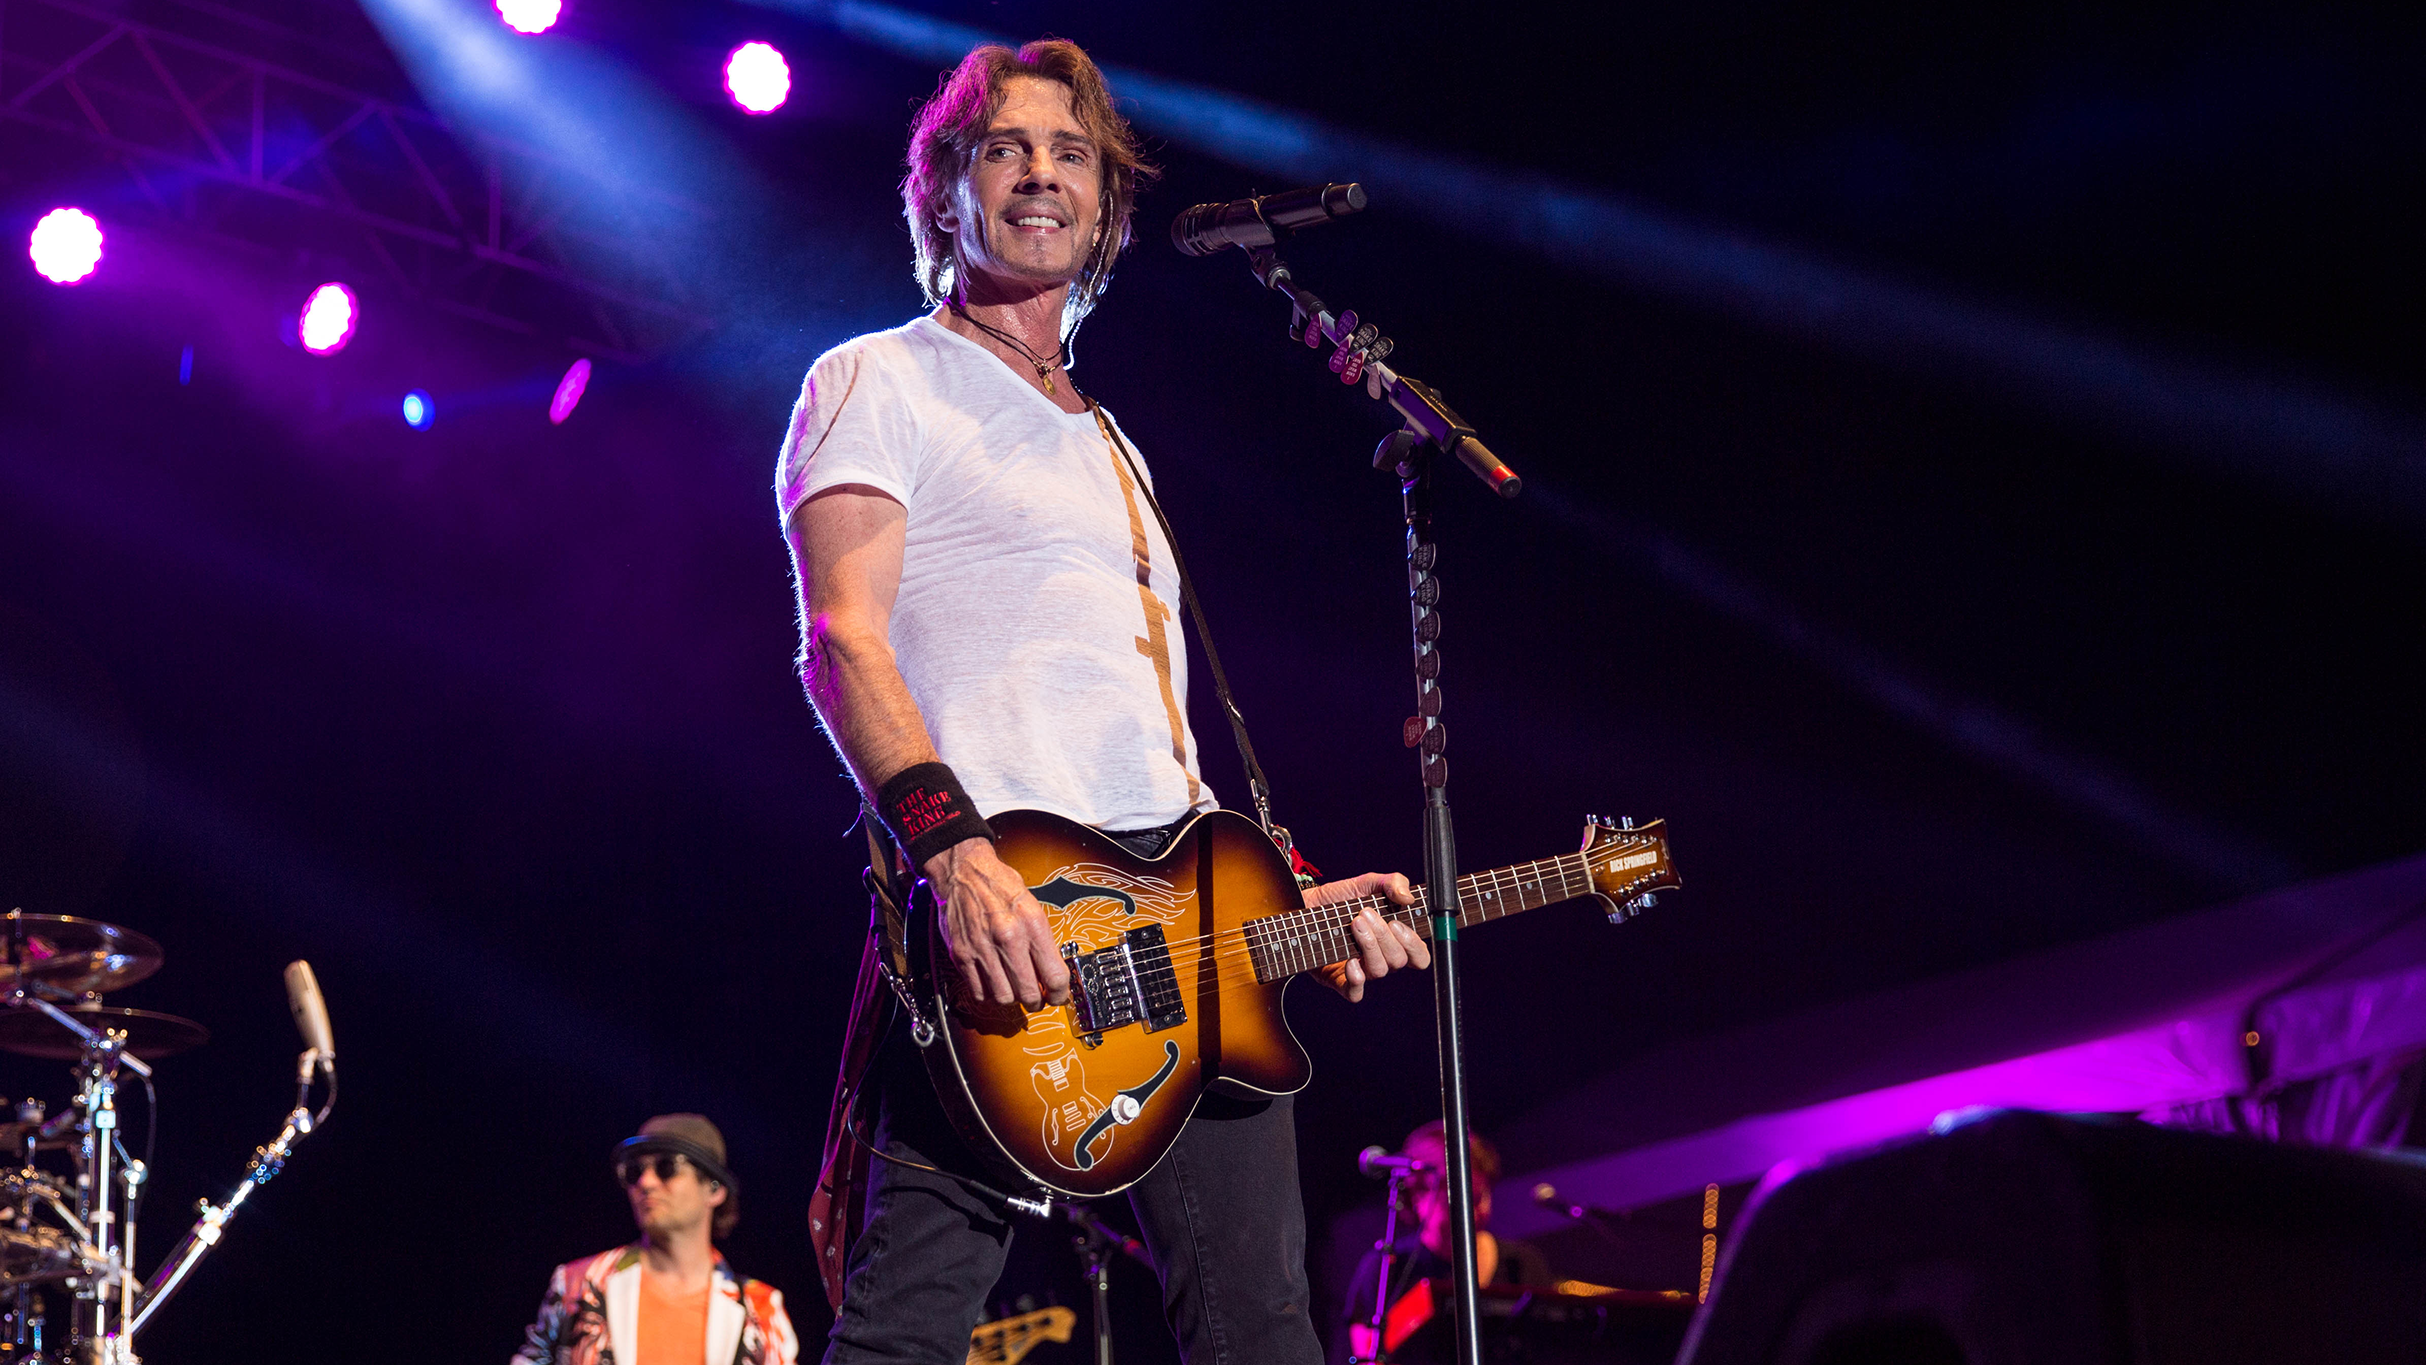 working presale code for Rick Springfield advanced tickets in New Buffalo at Silver Creek Event Center at Four Winds New Buffalo